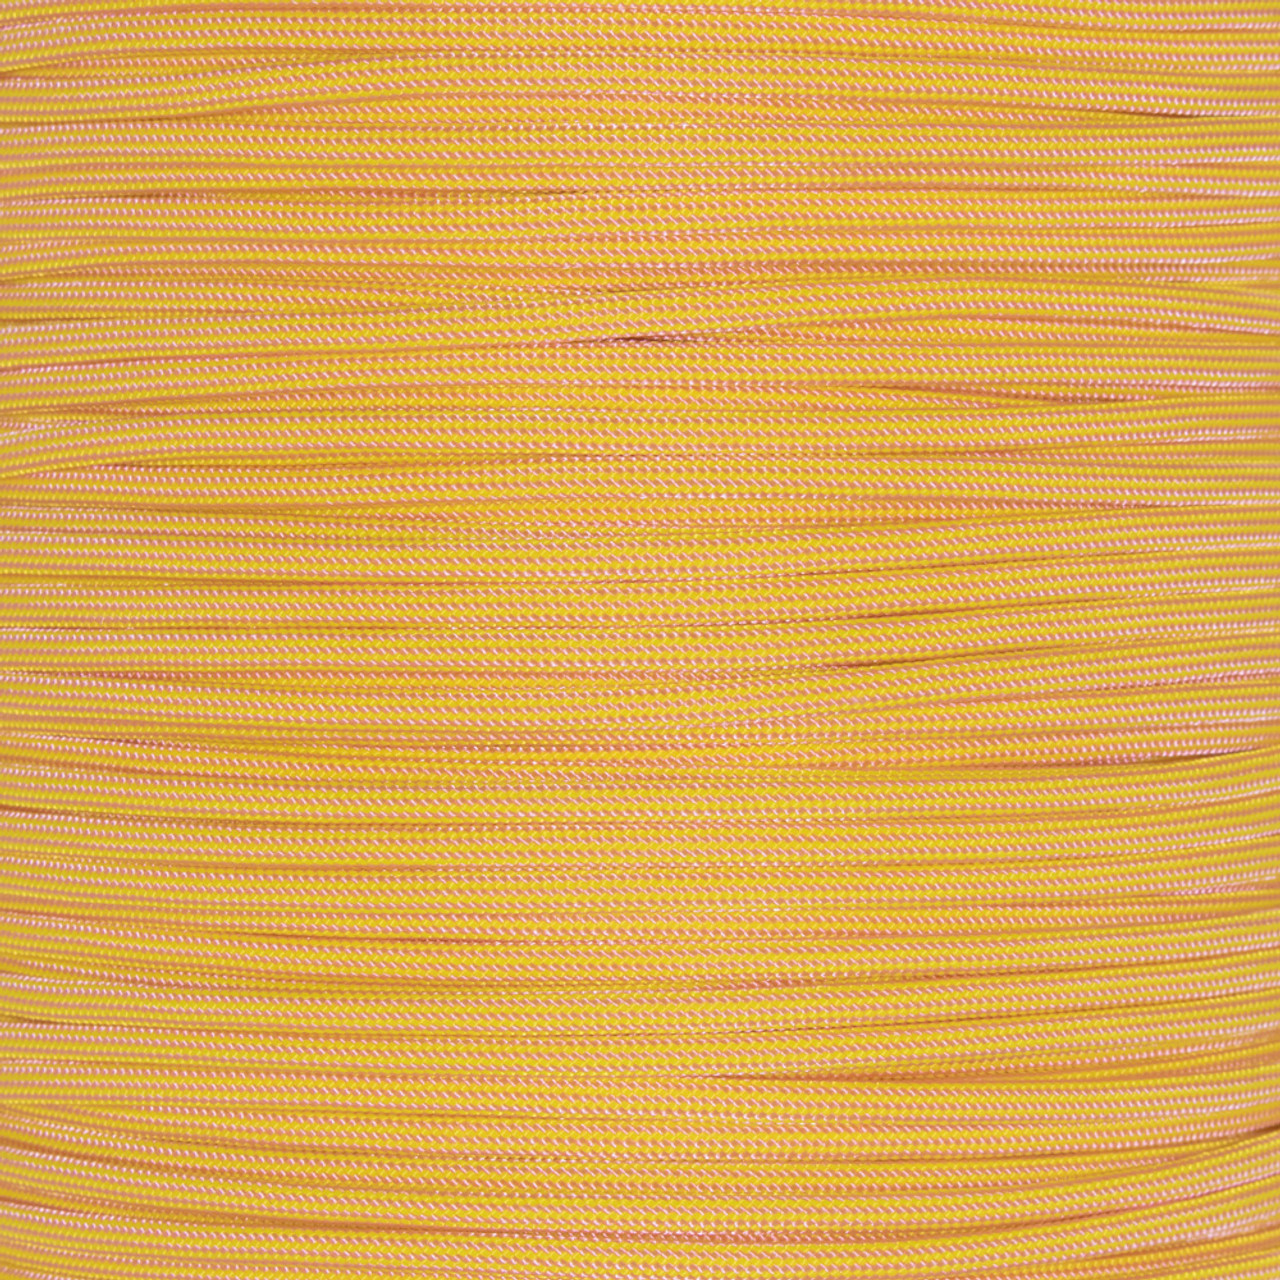 Canary Yellow 550 Paracord 100 feet Made in USA 